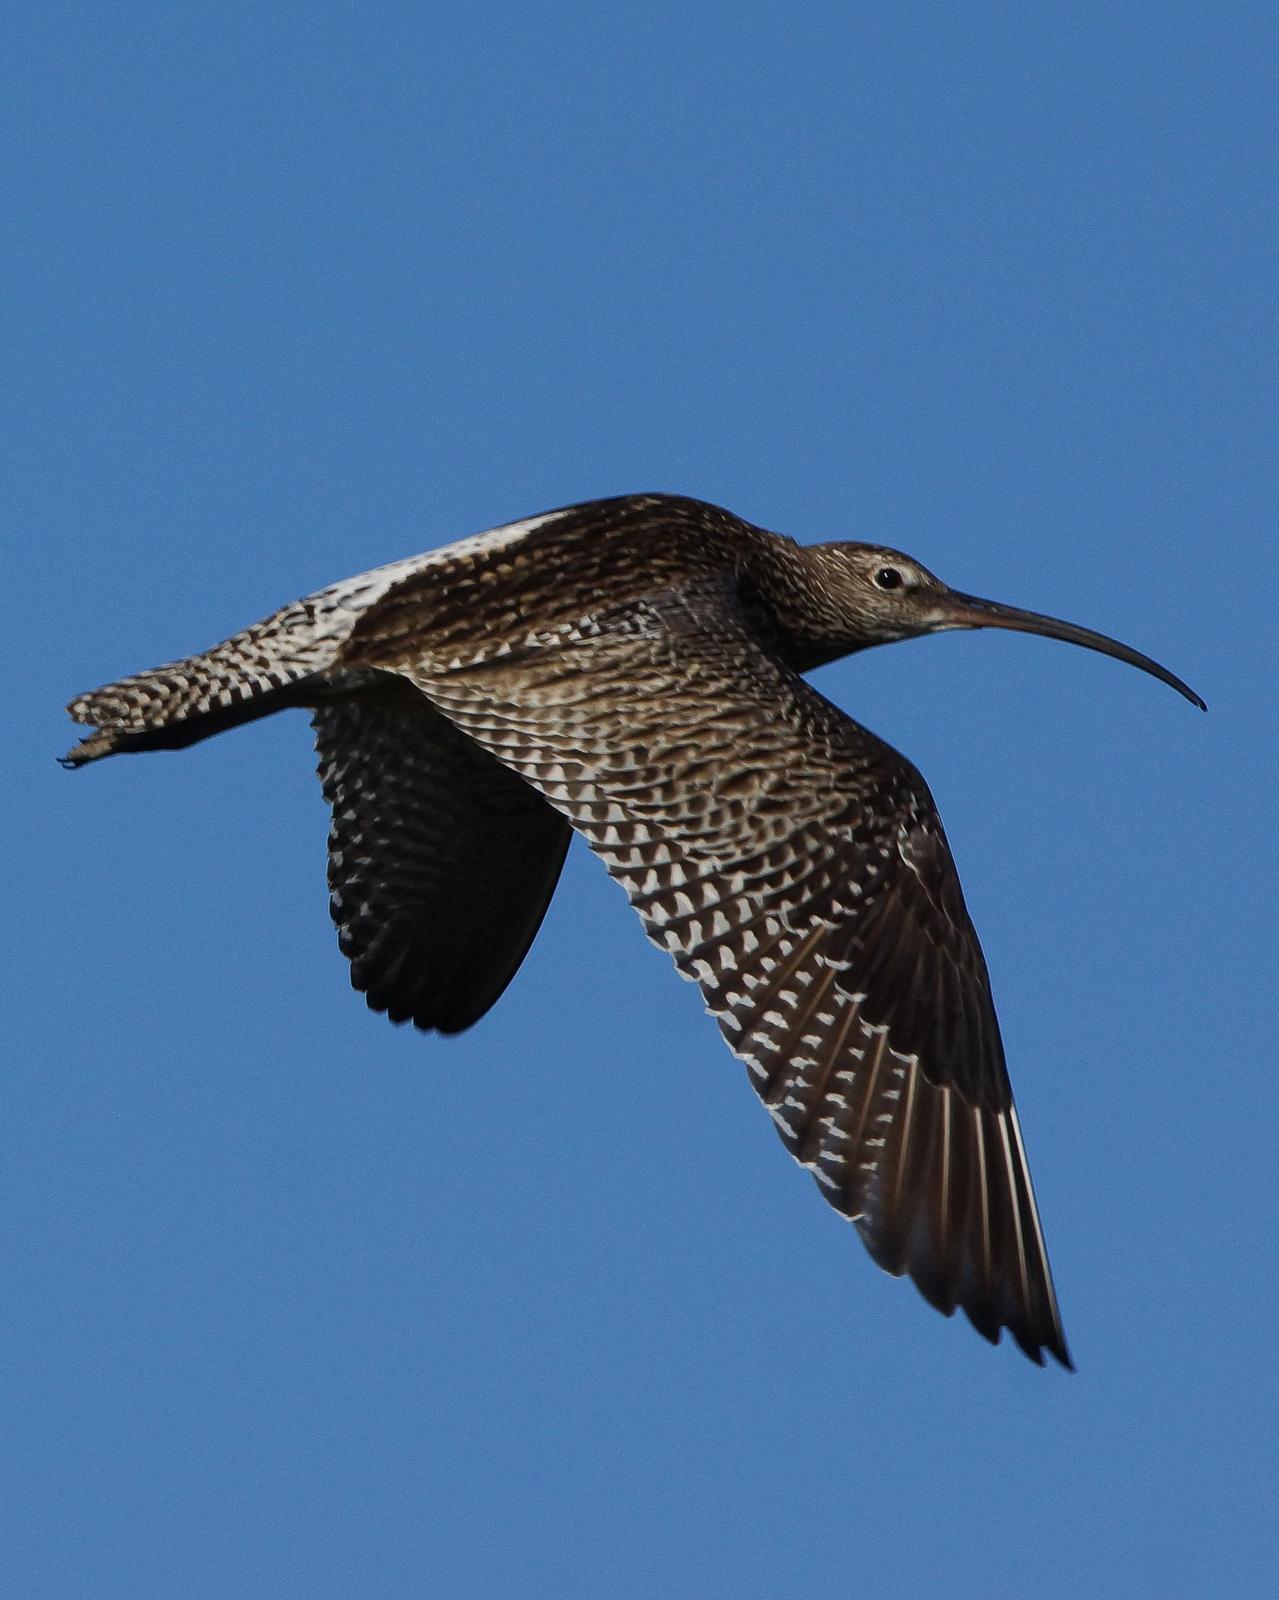 Eurasian Curlew Photo by Steve Percival